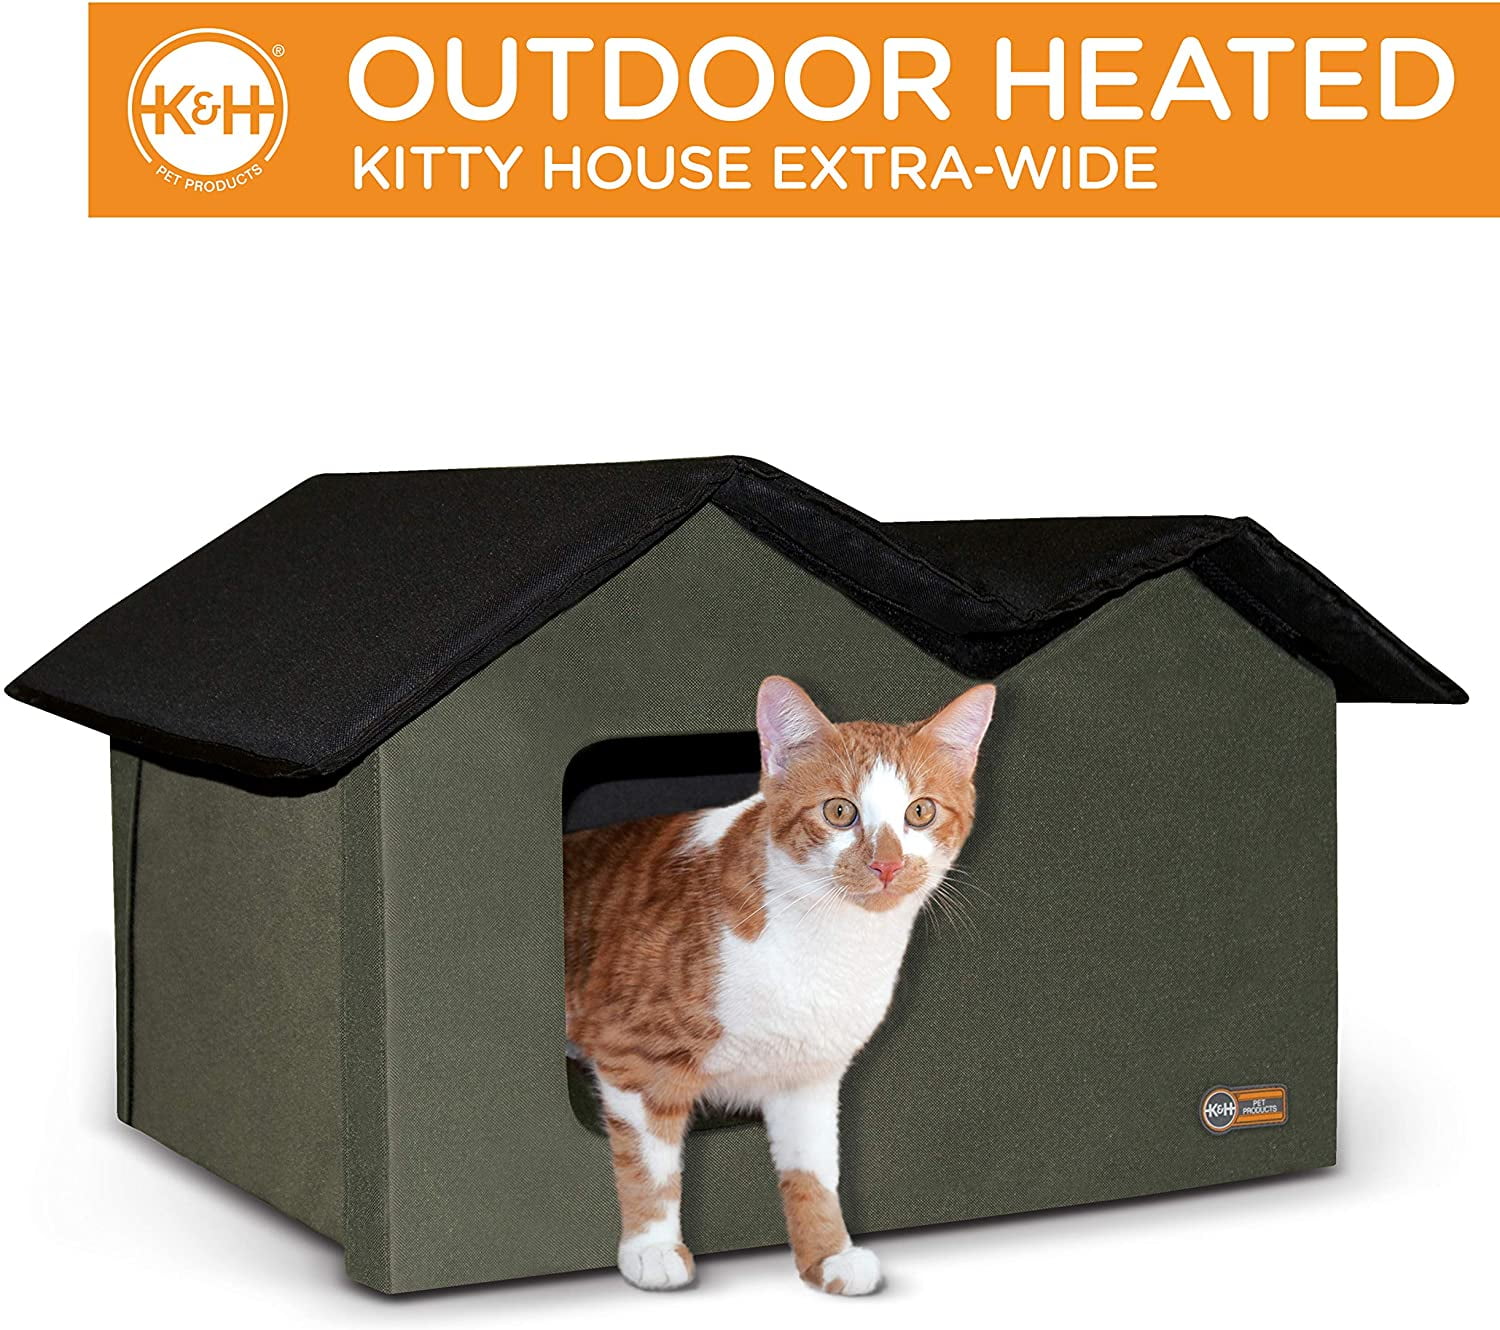 kaigeli Cat Dog House Thickened Outdoor Pet House Waterproof Foldable Tent with Sponge Lining Outdoor Kitty House Cat Shelter for Cat Or Small Dog Foldable Cat Cave Bed for Winter 